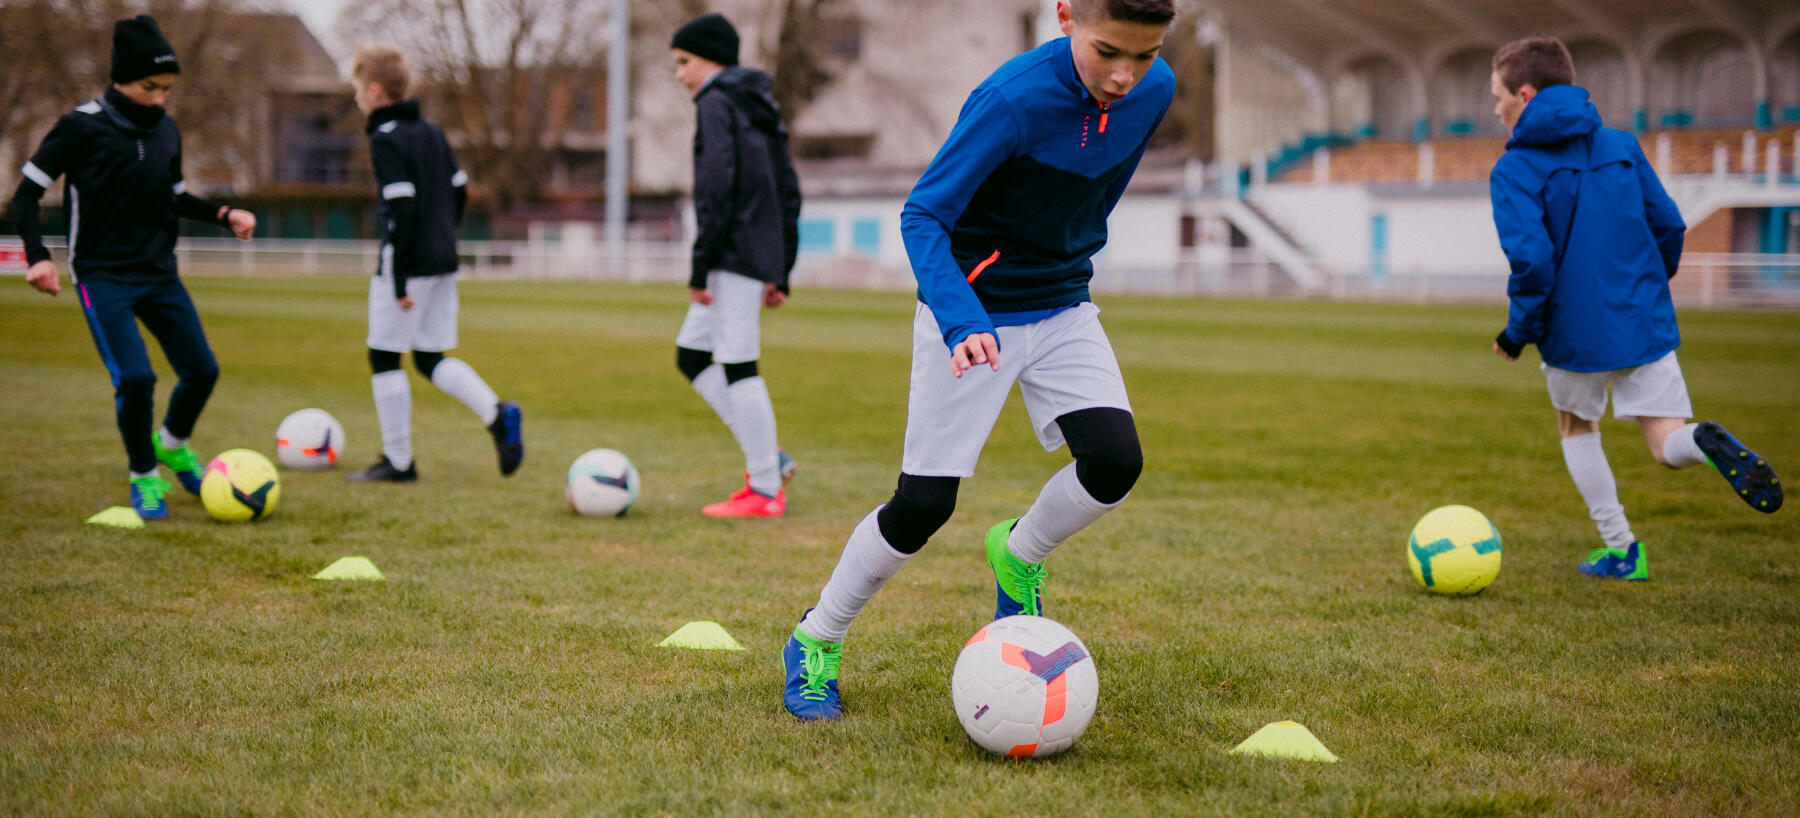 ESSENTIAL FOOTBALL TRAINING EQUIPMENT: For training that's fun and effective